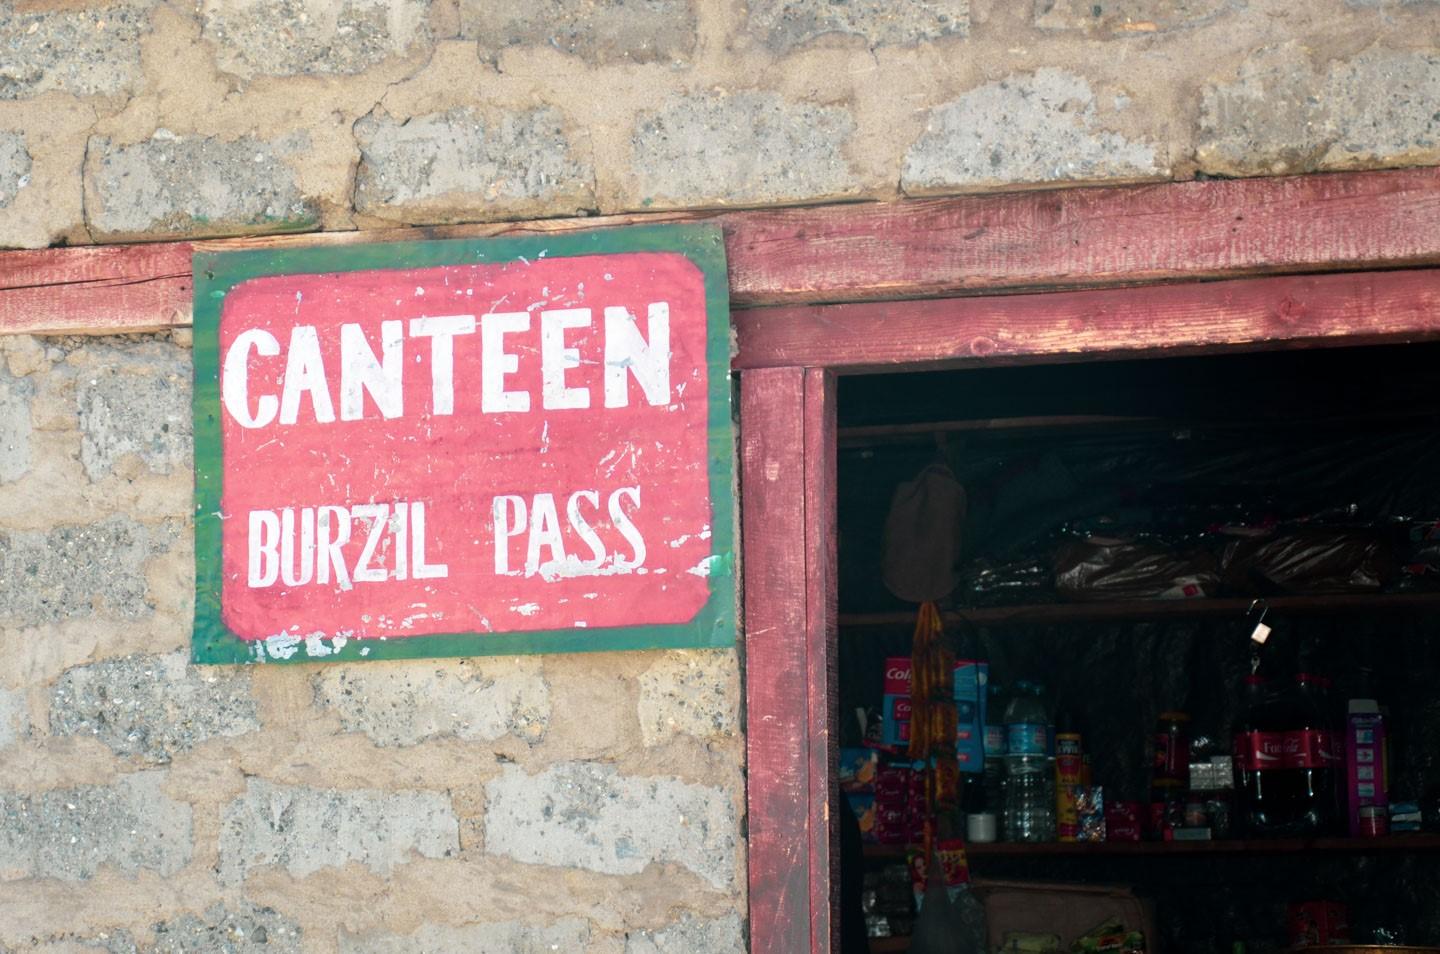 A Local Canteen selling snacks to the visitors at Burzil Pass